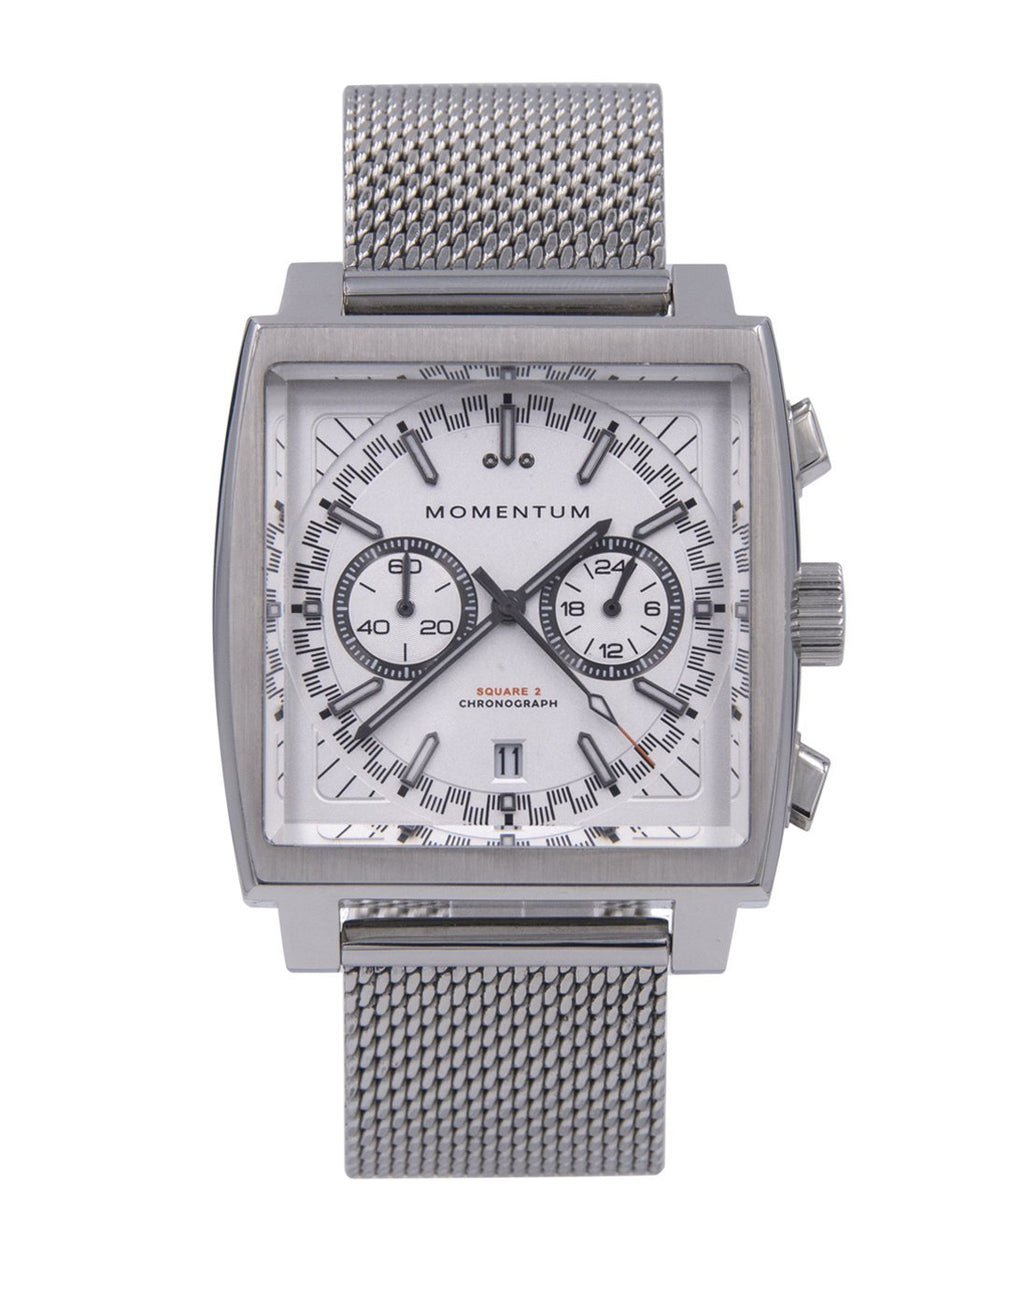 | | Chronograph Momentum Chronograph – Momentum Dress 2 Watch Watches Square